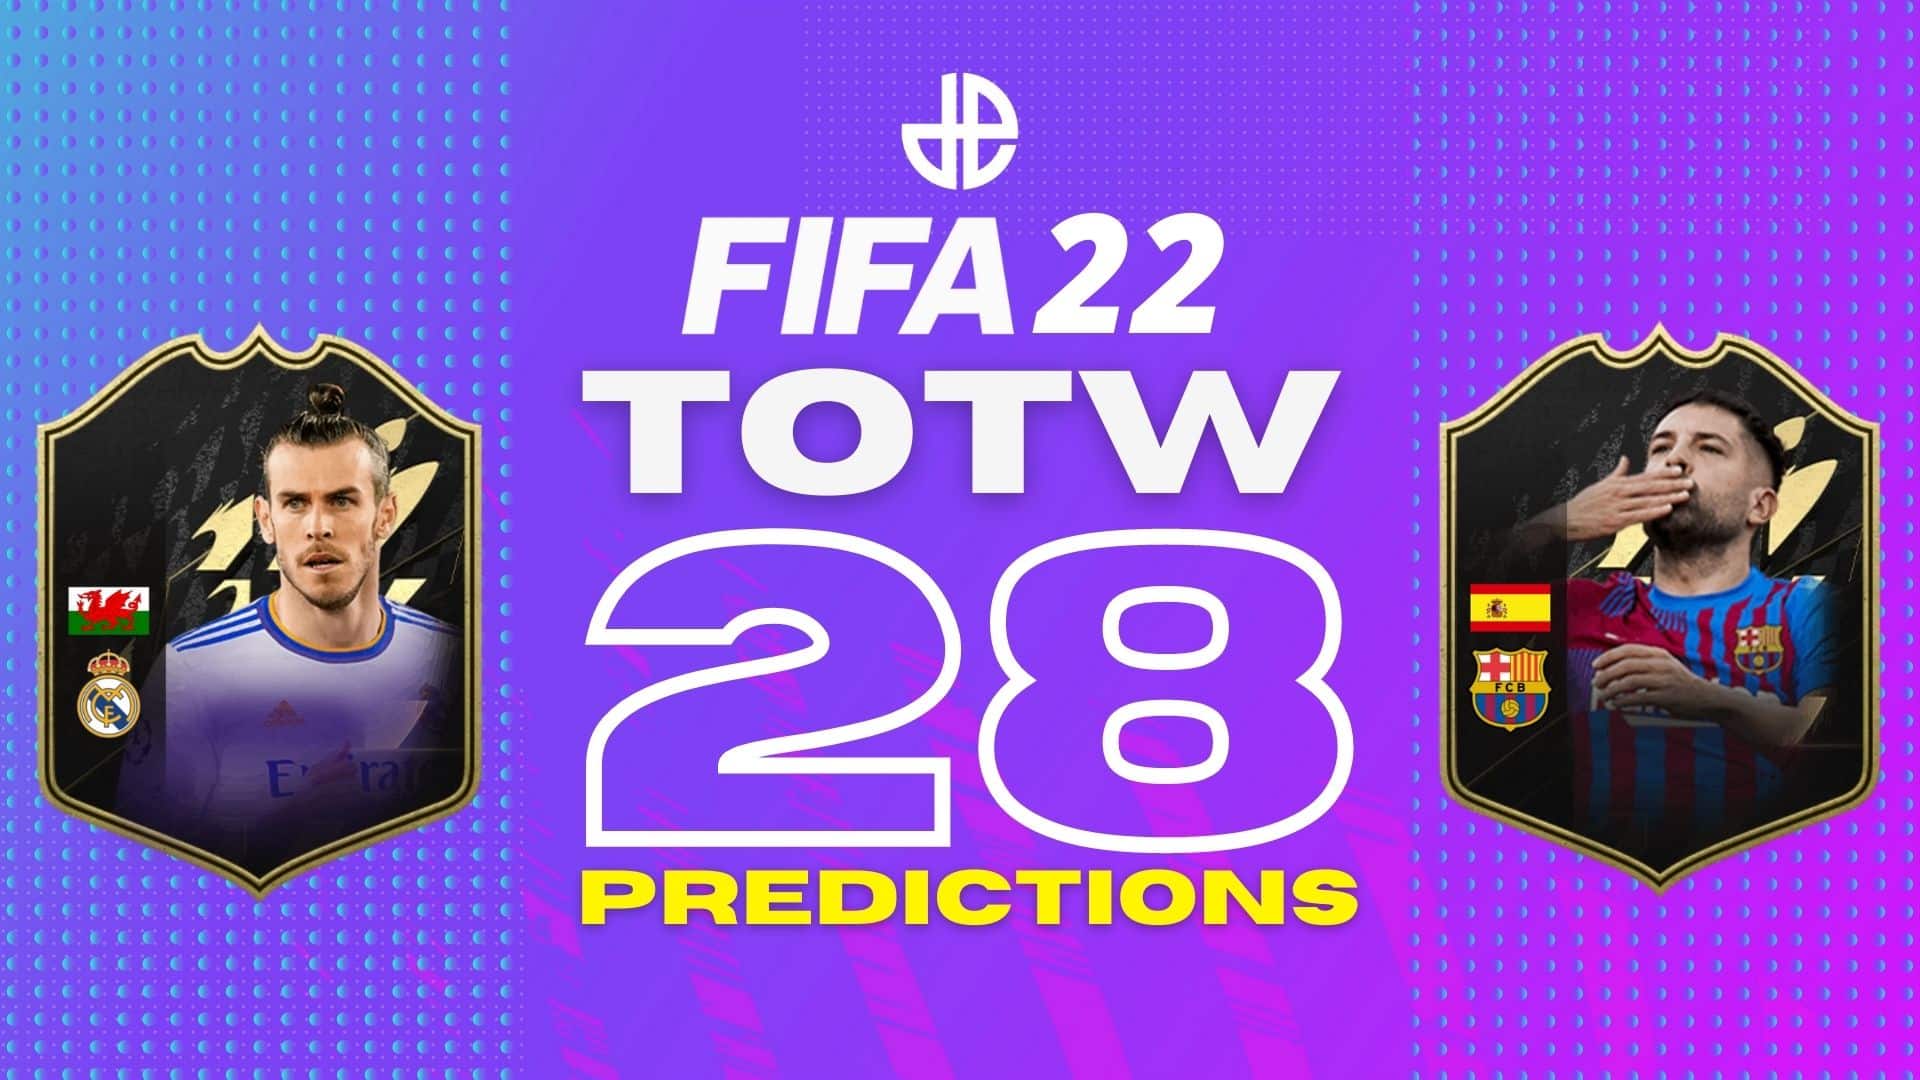 FIFA 22 TOTW 28 predictions with Bale and Alba cards